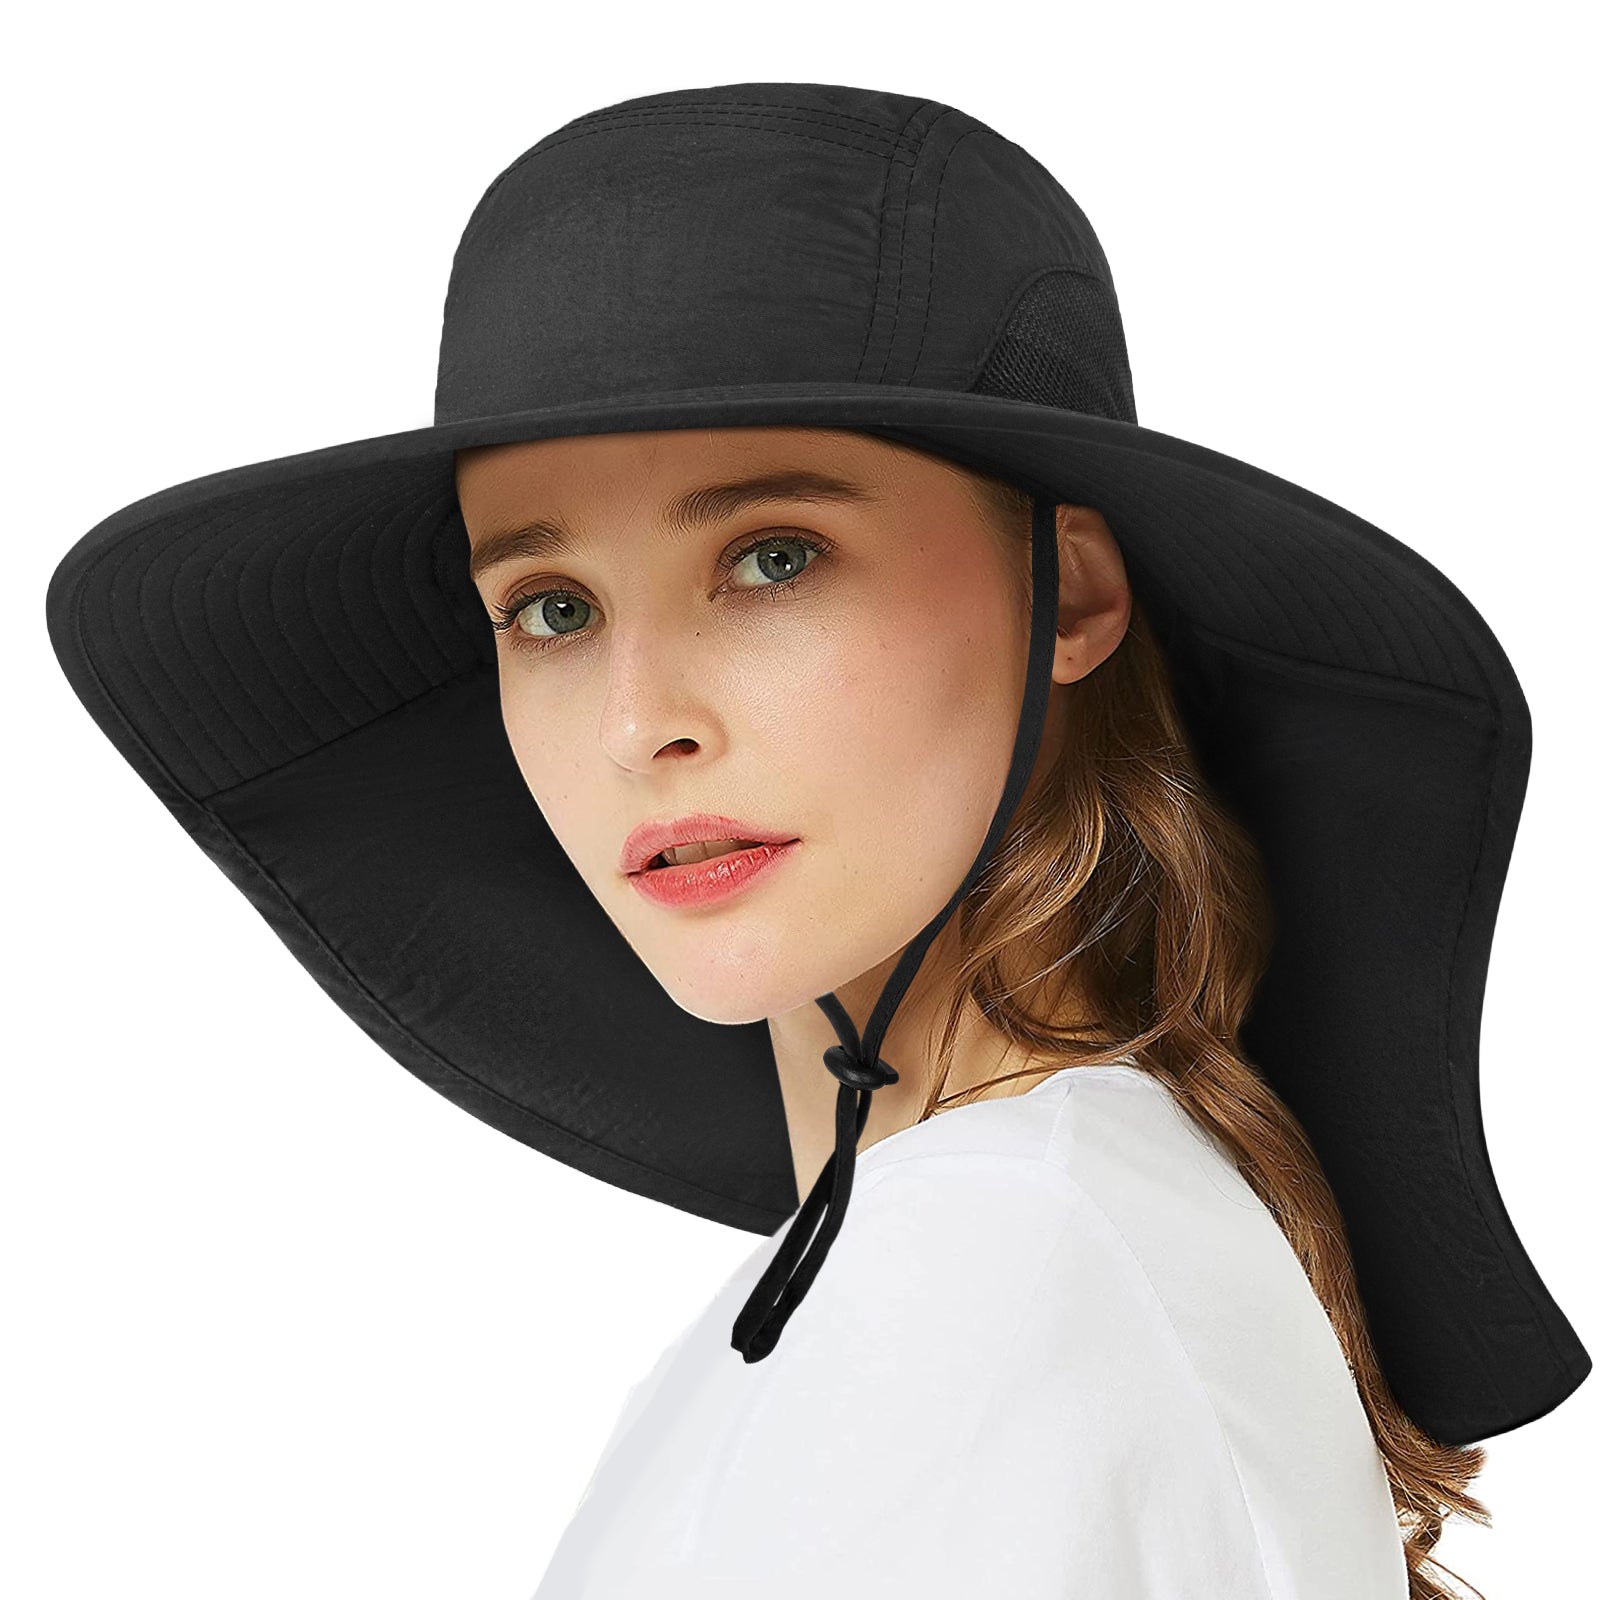 Sun hats for men and women